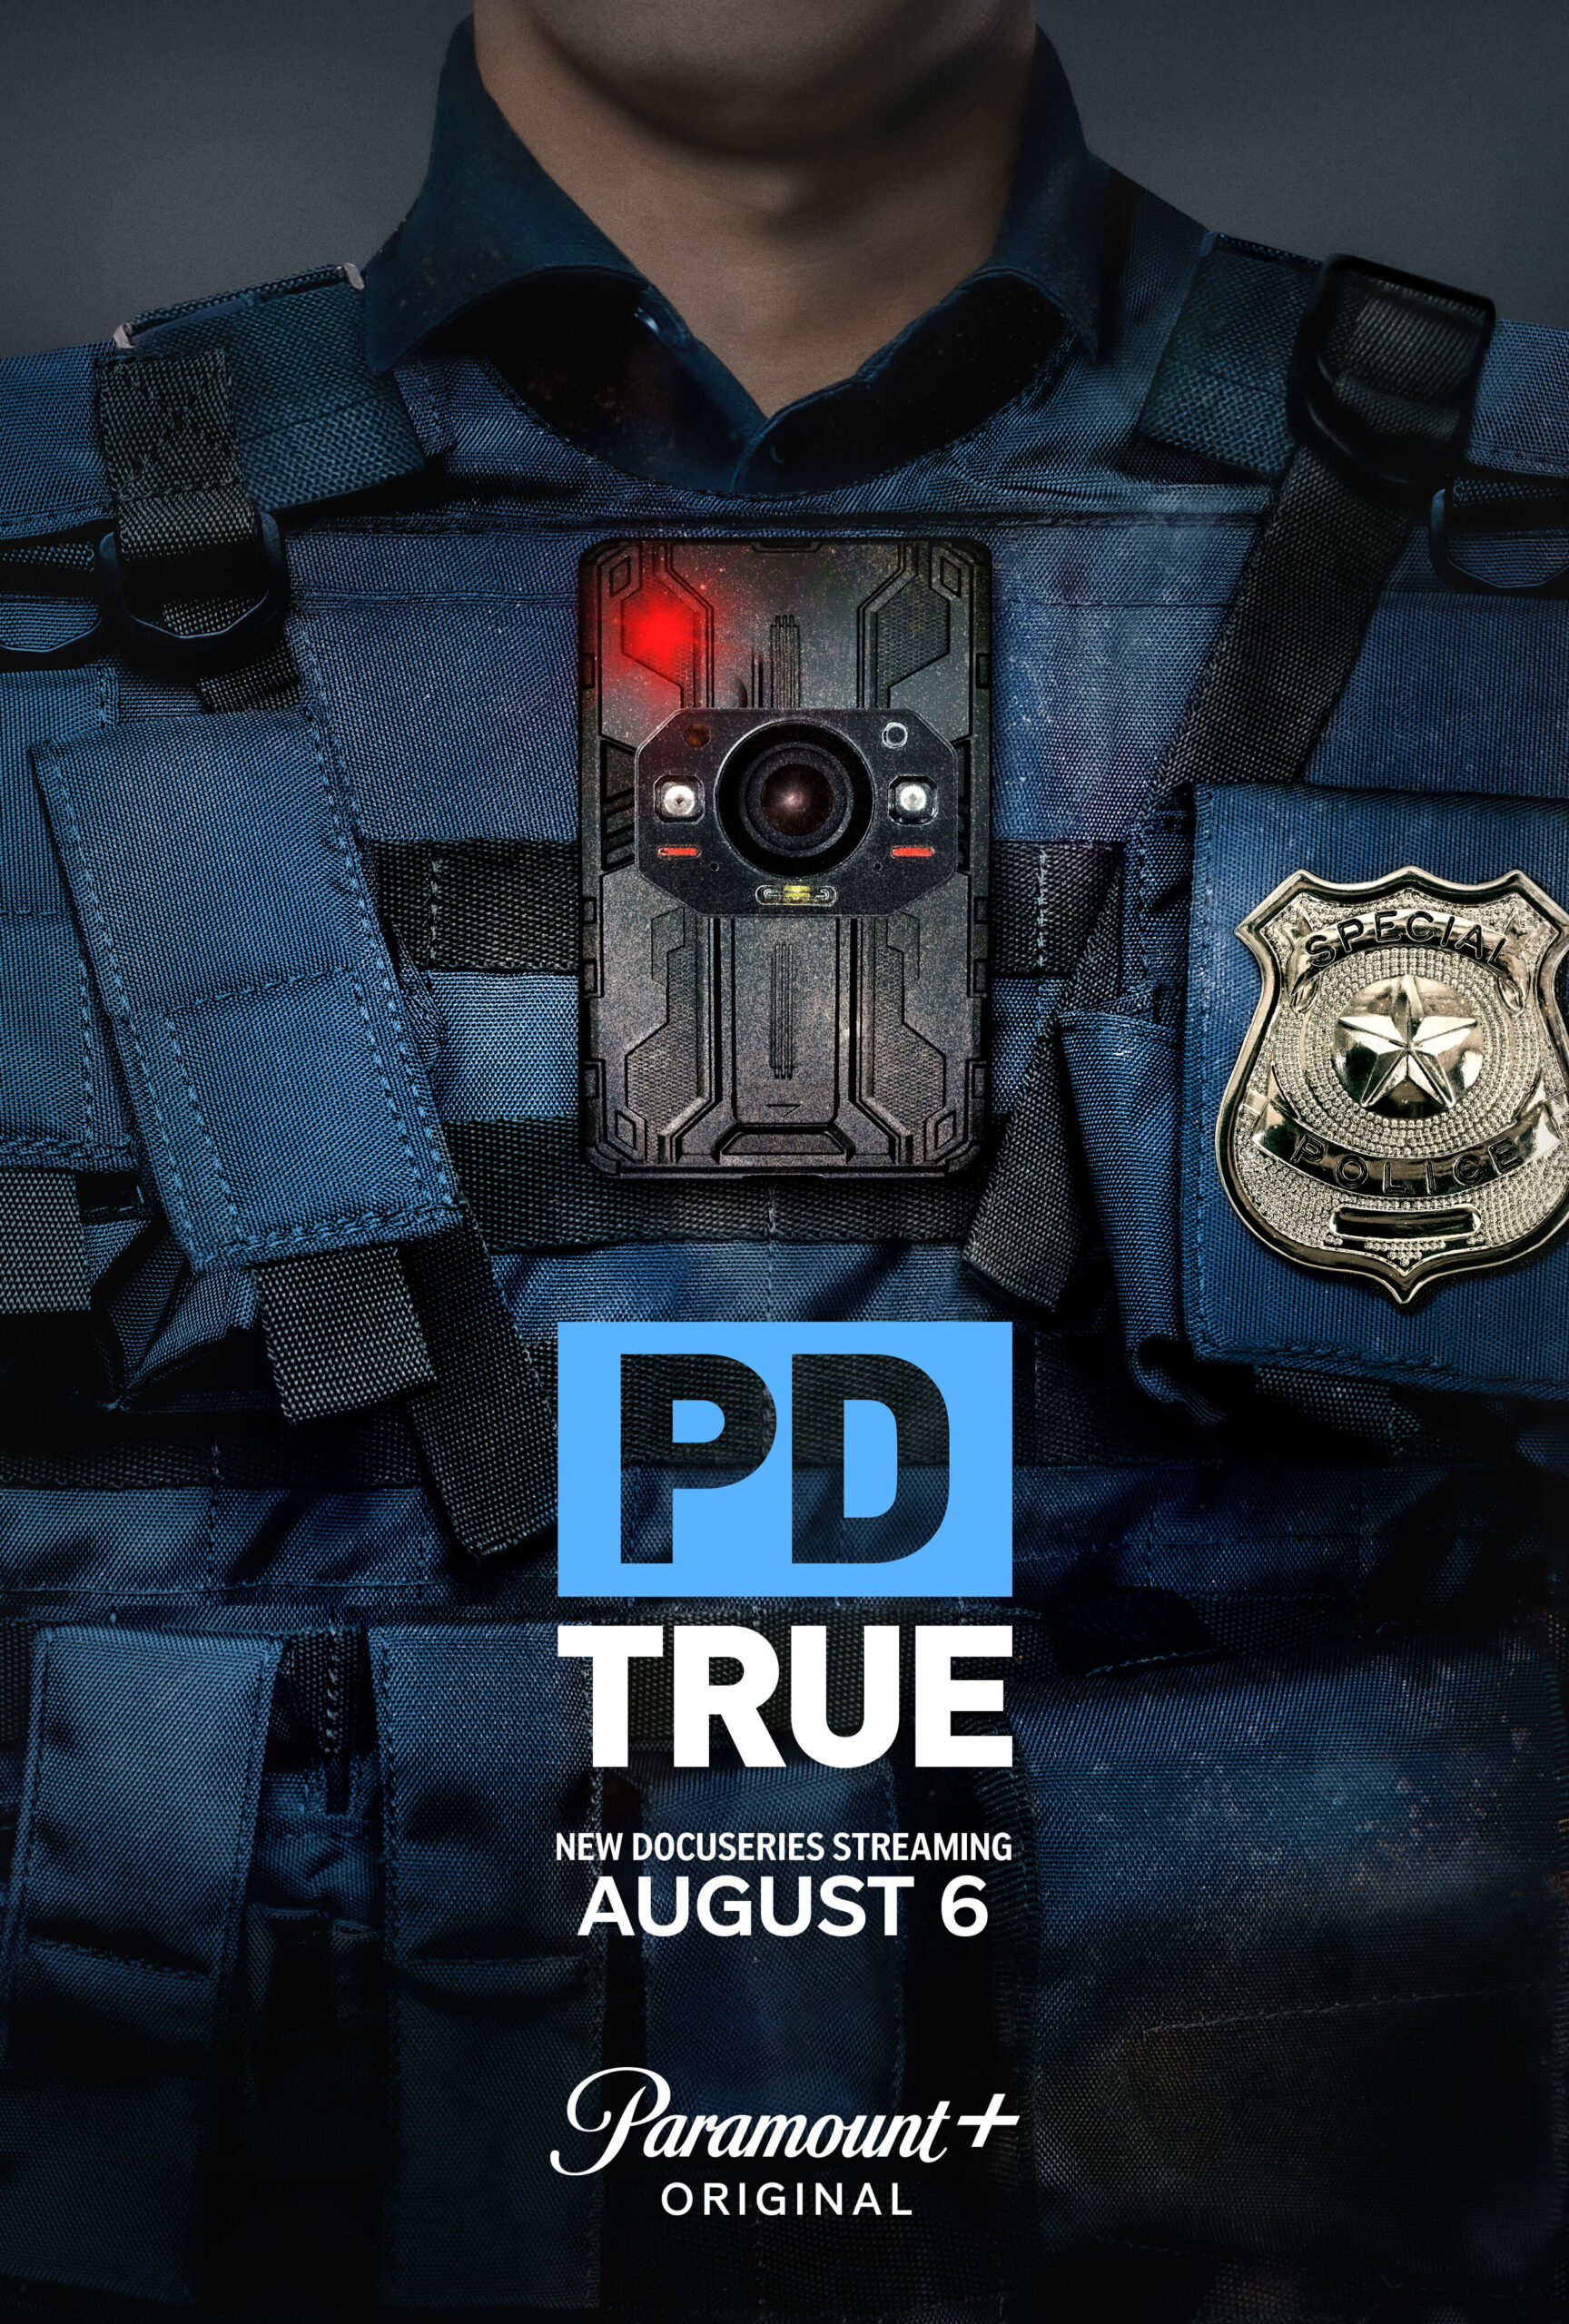 Docuseries "PD True" to Premiere on August 6 on Paramount+